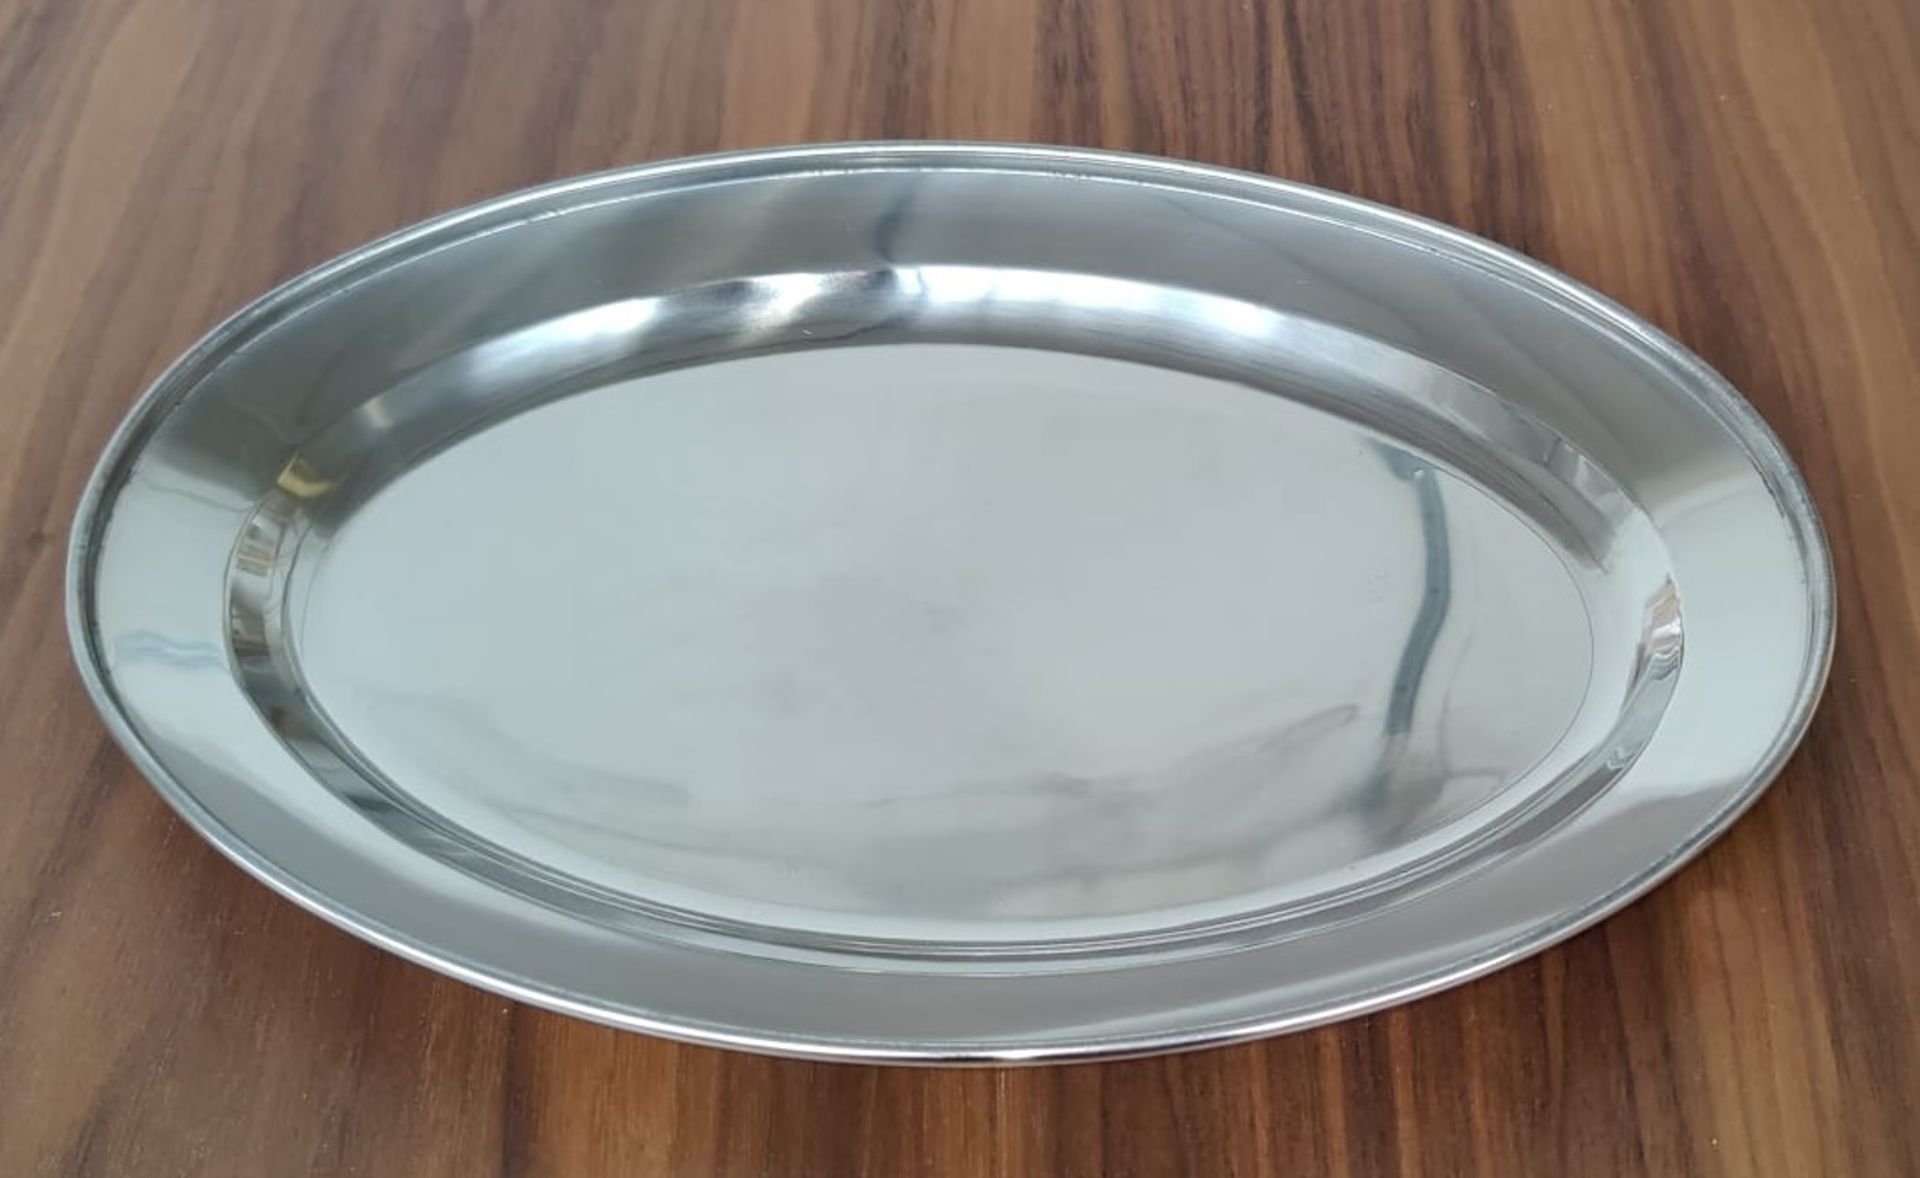 18 x Stainless Steel Small Oval Service Trays - Size: 255mm x 180mm - Brand New Boxed Stock RRP £90 - Image 2 of 8